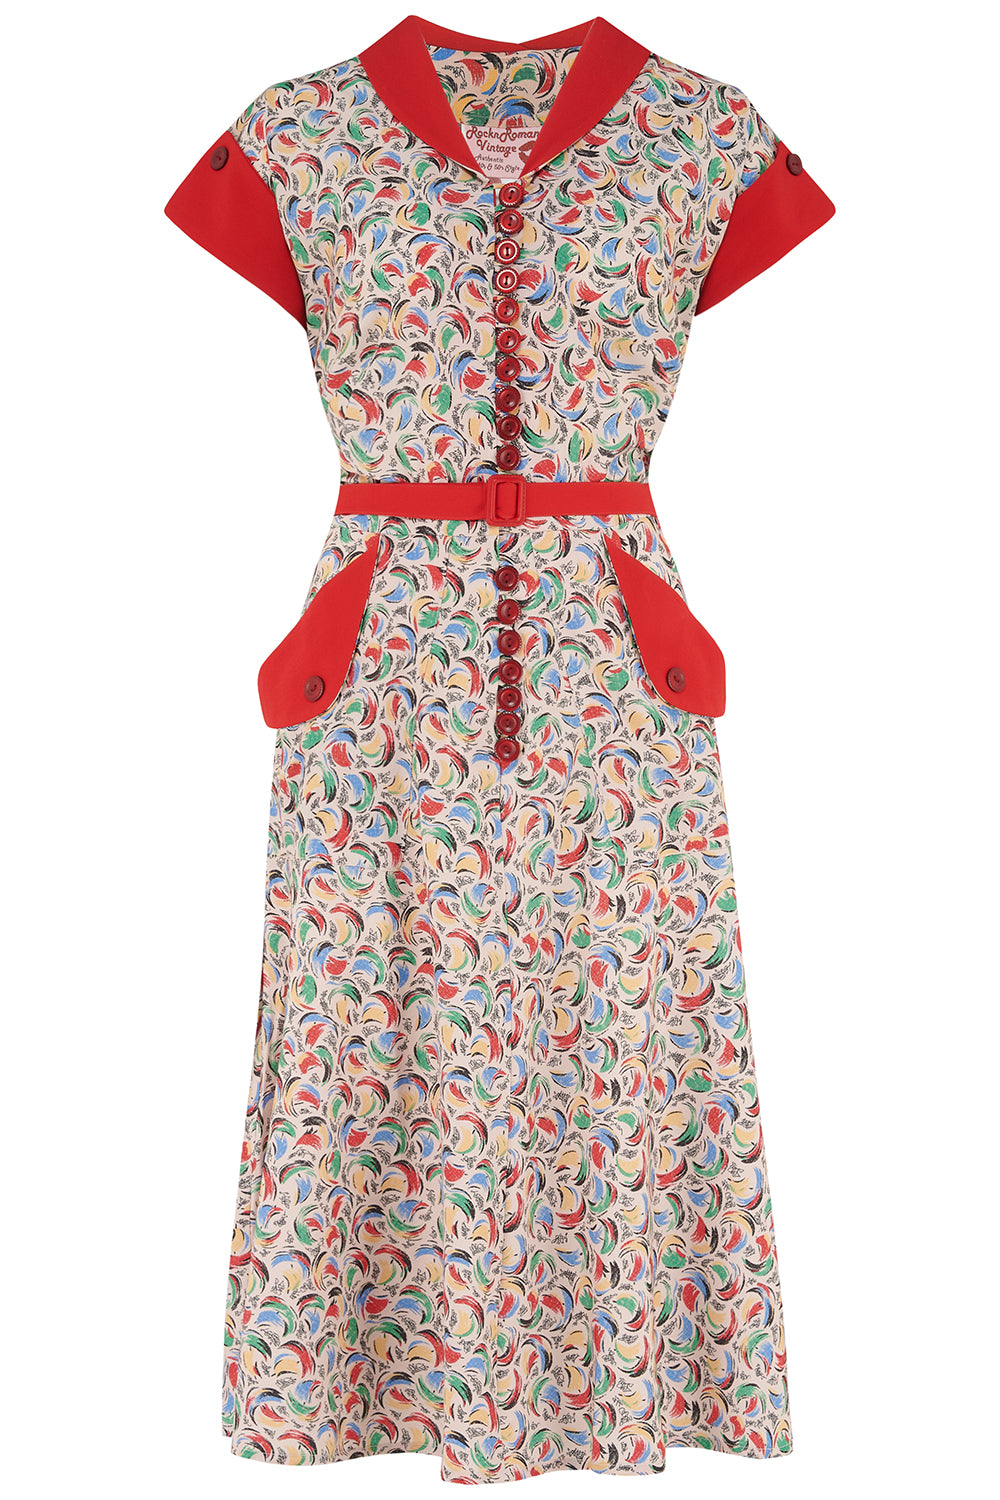 The "Casey" Dress in Tutti Frutti Print With Red Contrasts, True & Authentic 1950s Vintage Style - True and authentic vintage style clothing, inspired by the Classic styles of CC41 , WW2 and the fun 1950s RocknRoll era, for everyday wear plus events like Goodwood Revival, Twinwood Festival and Viva Las Vegas Rockabilly Weekend Rock n Romance Rock n Romance